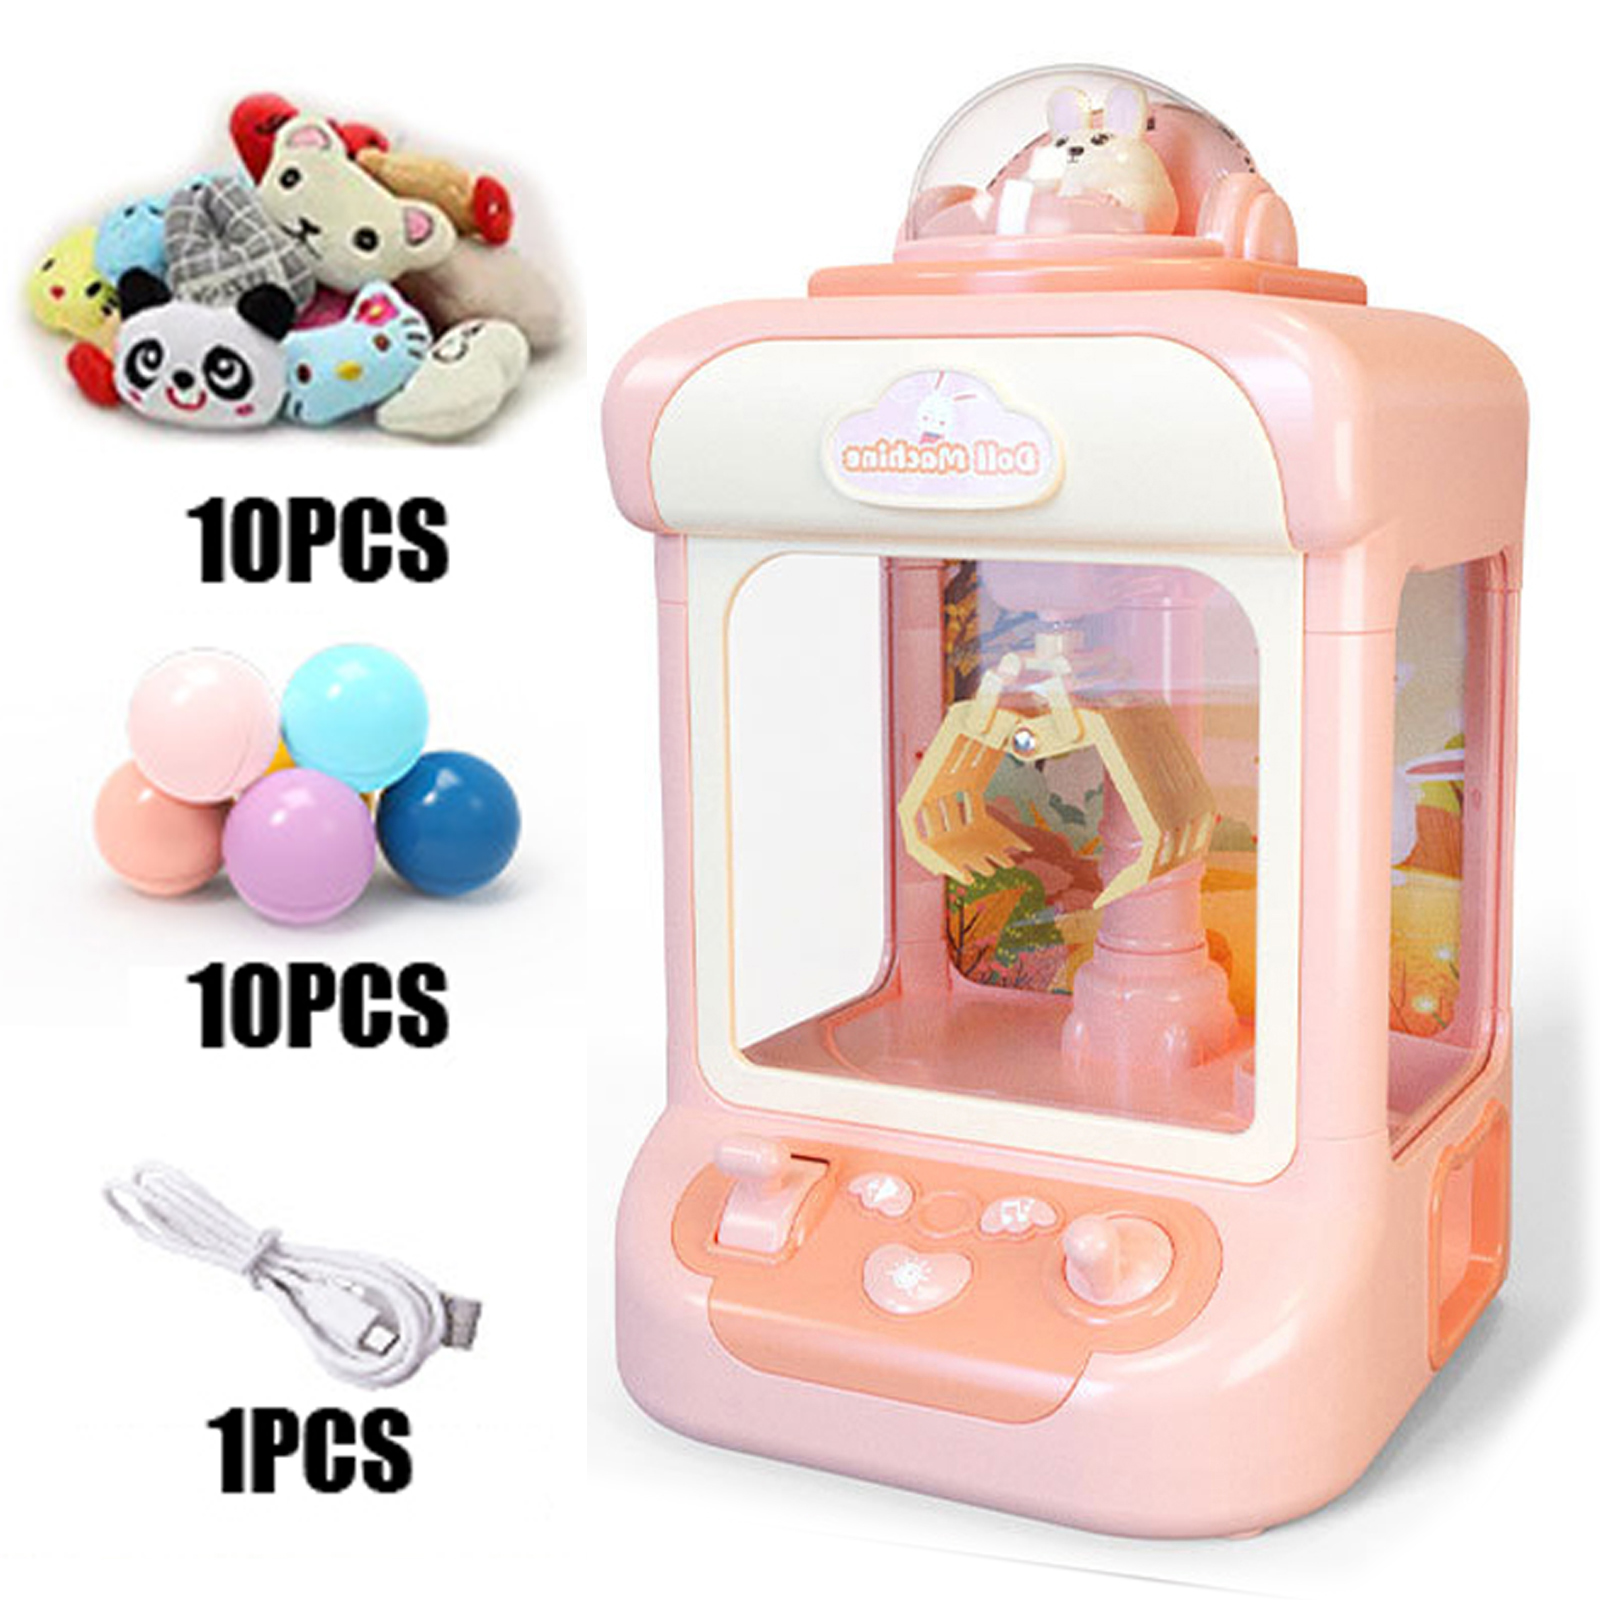 Autrucker Mini Claw Machine for Kids|Electronic Arcade Game Indoor Toy for Tiny Stuff Small Fun Cool Things|Candy Vending Machine Toy,Unicorn Toys for Girls